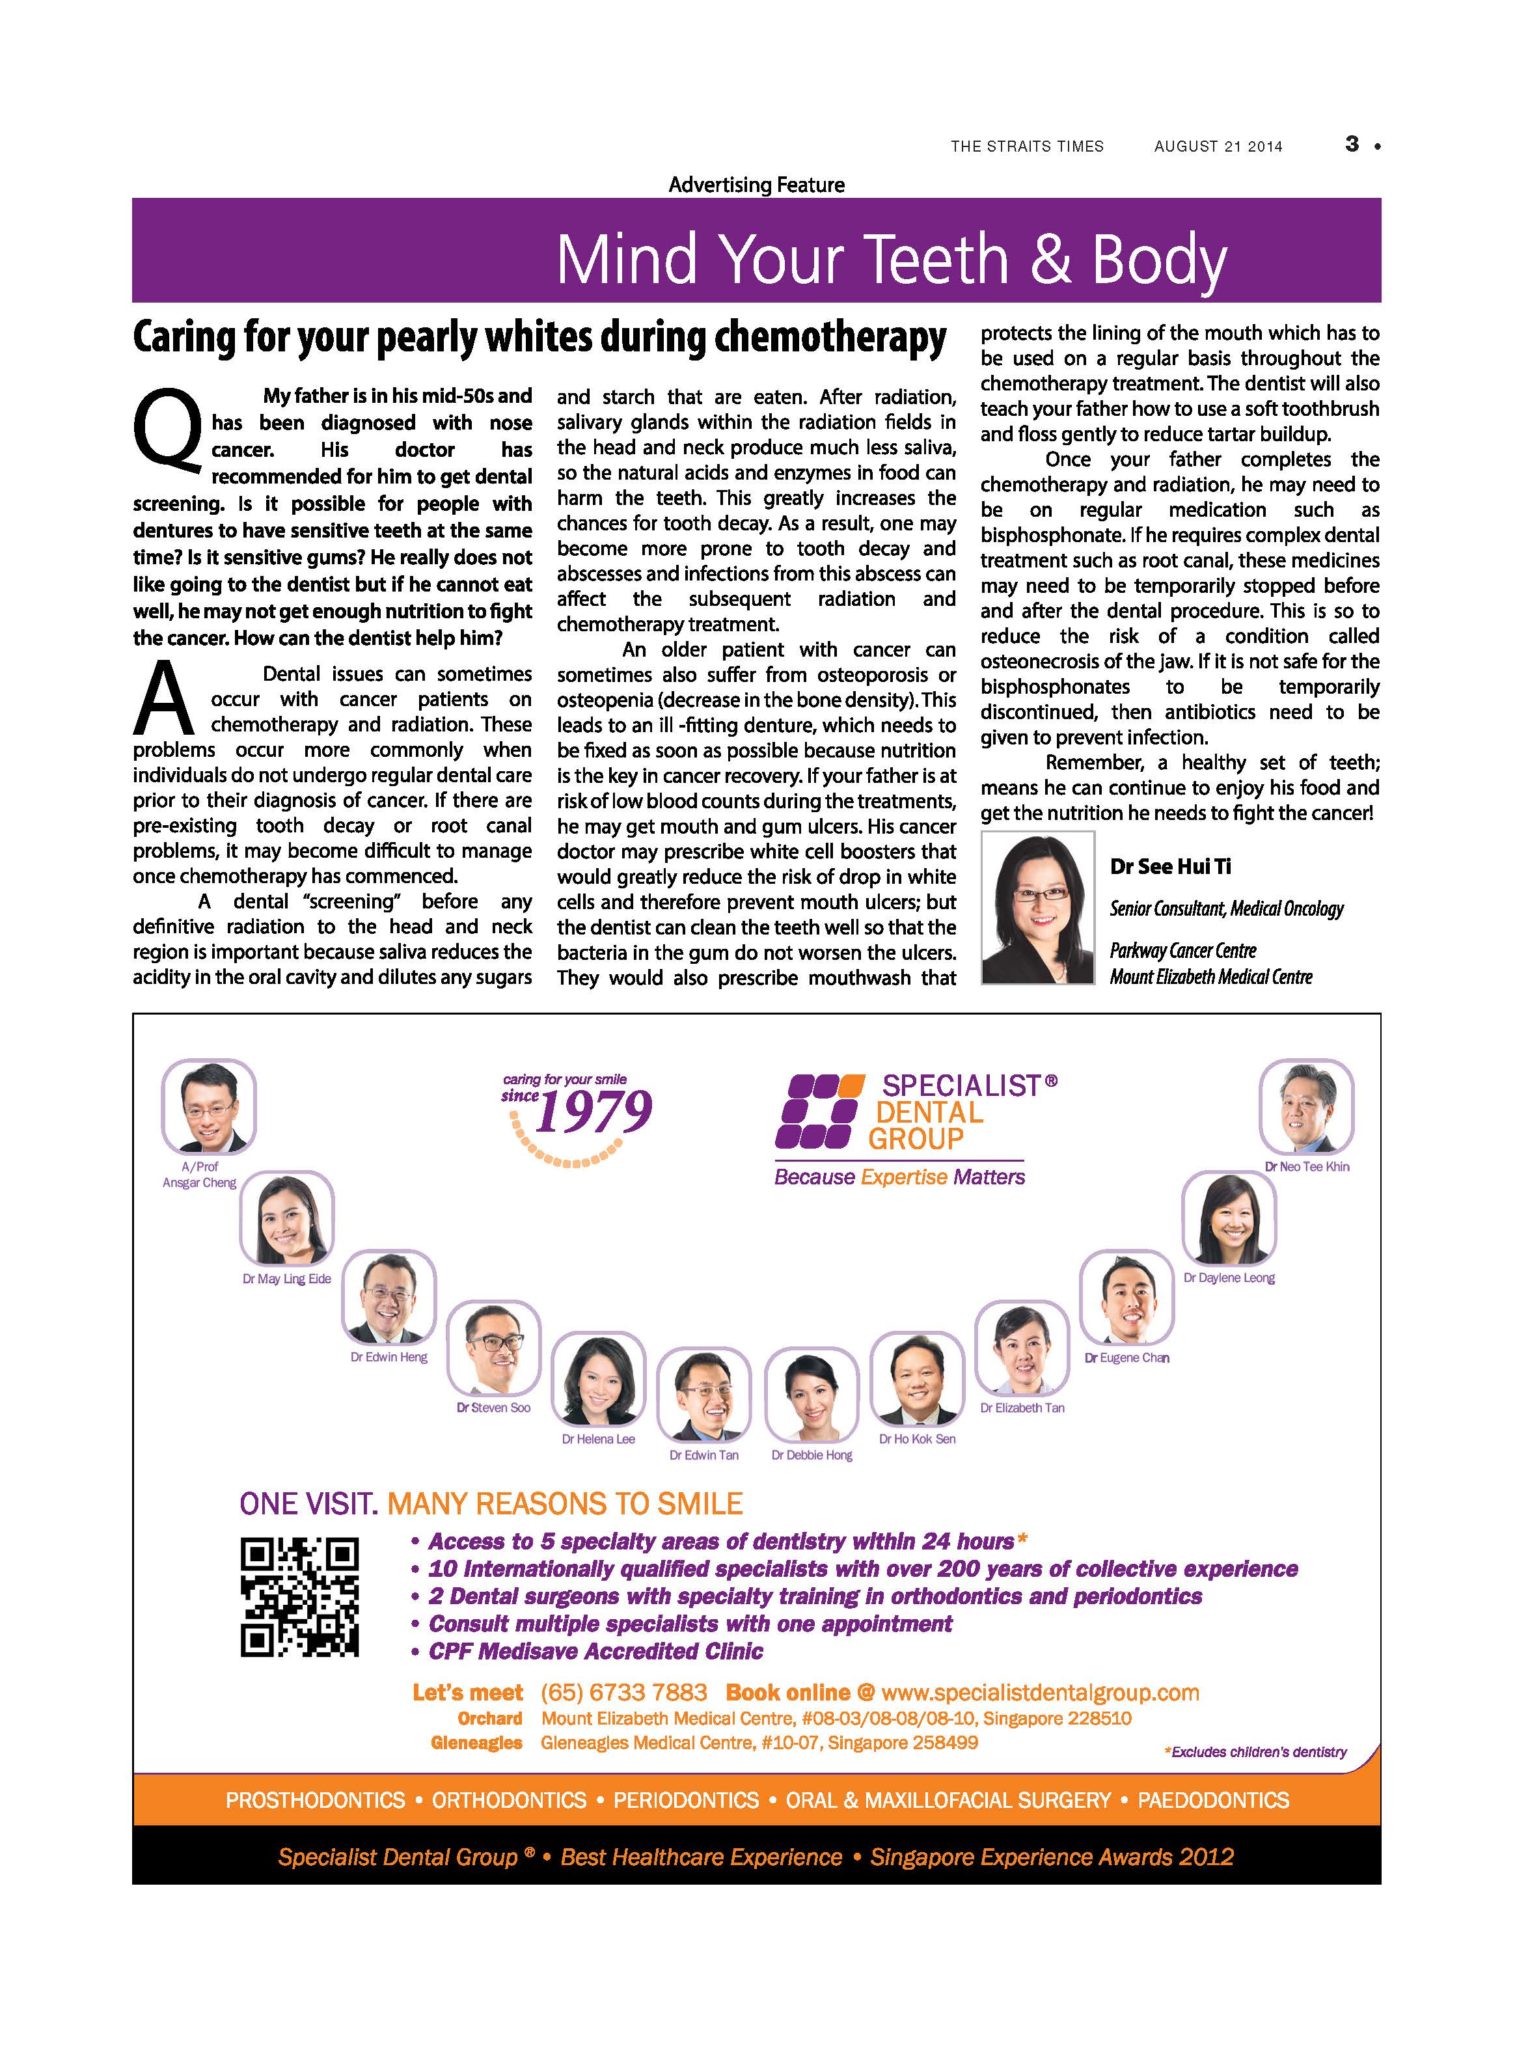 The Straits Times, Mind Your Body, August 21, 2014: “Caring for your pearly whites during chemotherapy”